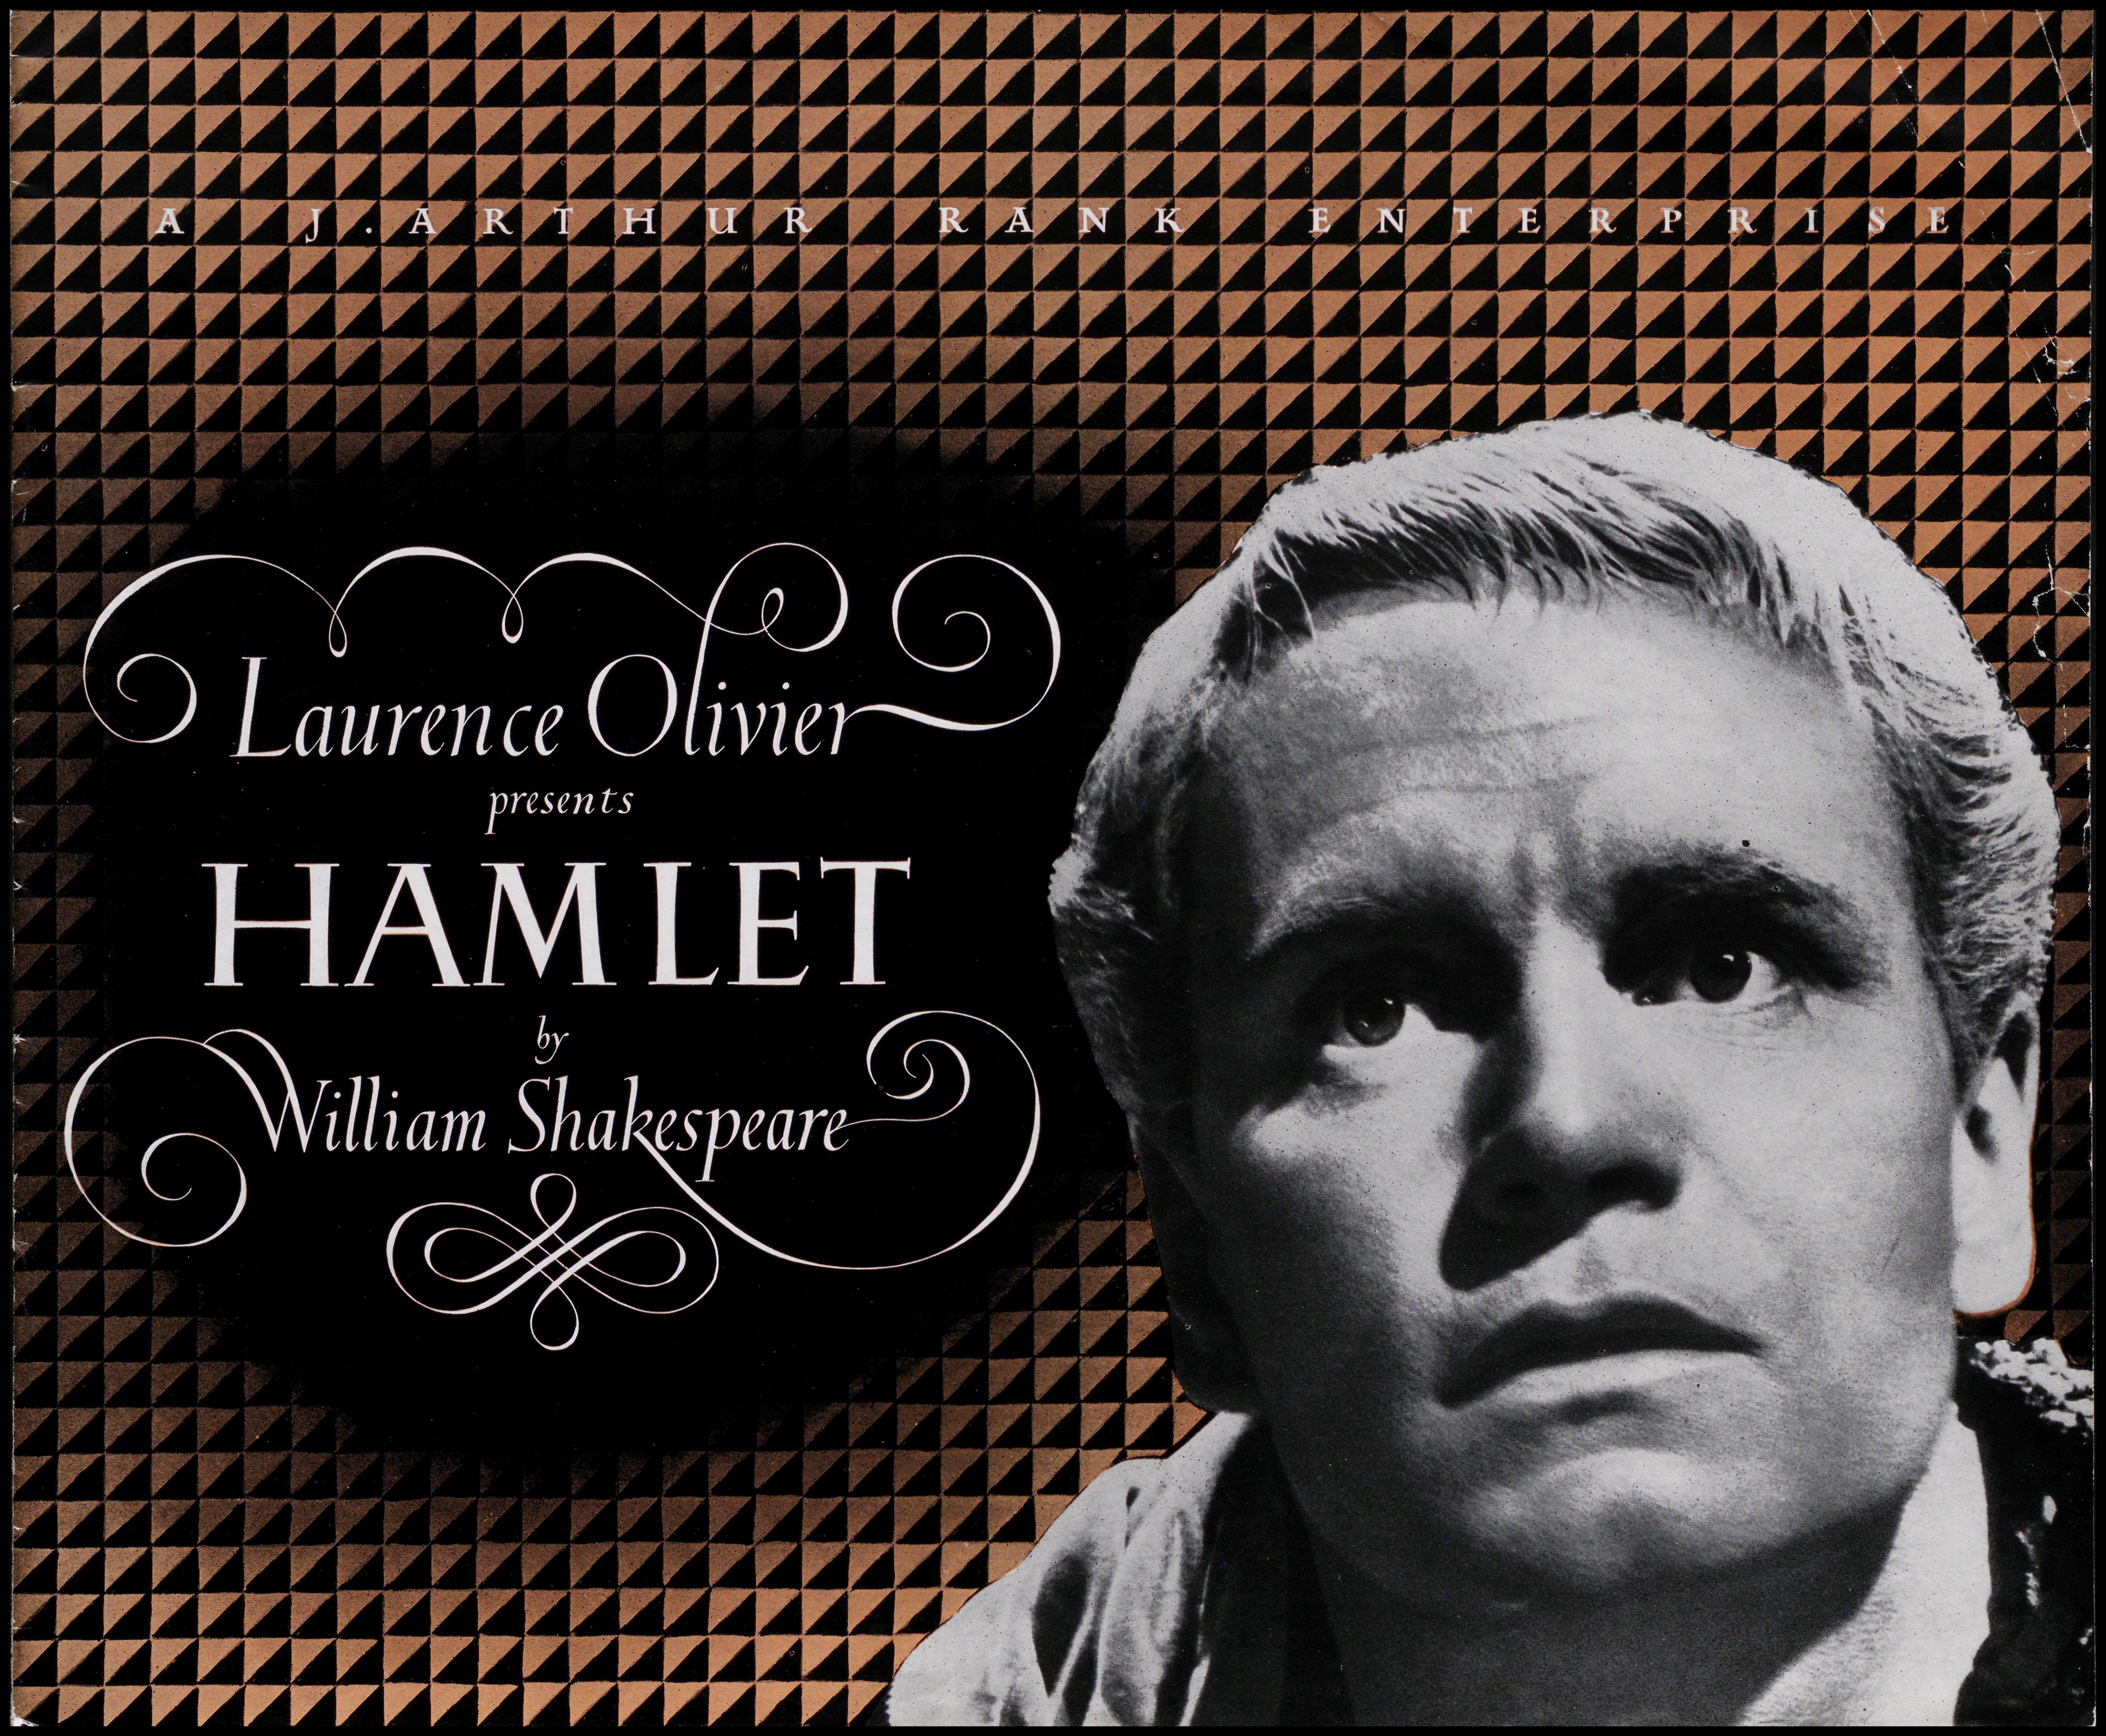 Programme cover - Laurence Olivier presents Hamlet by William Shakespeare